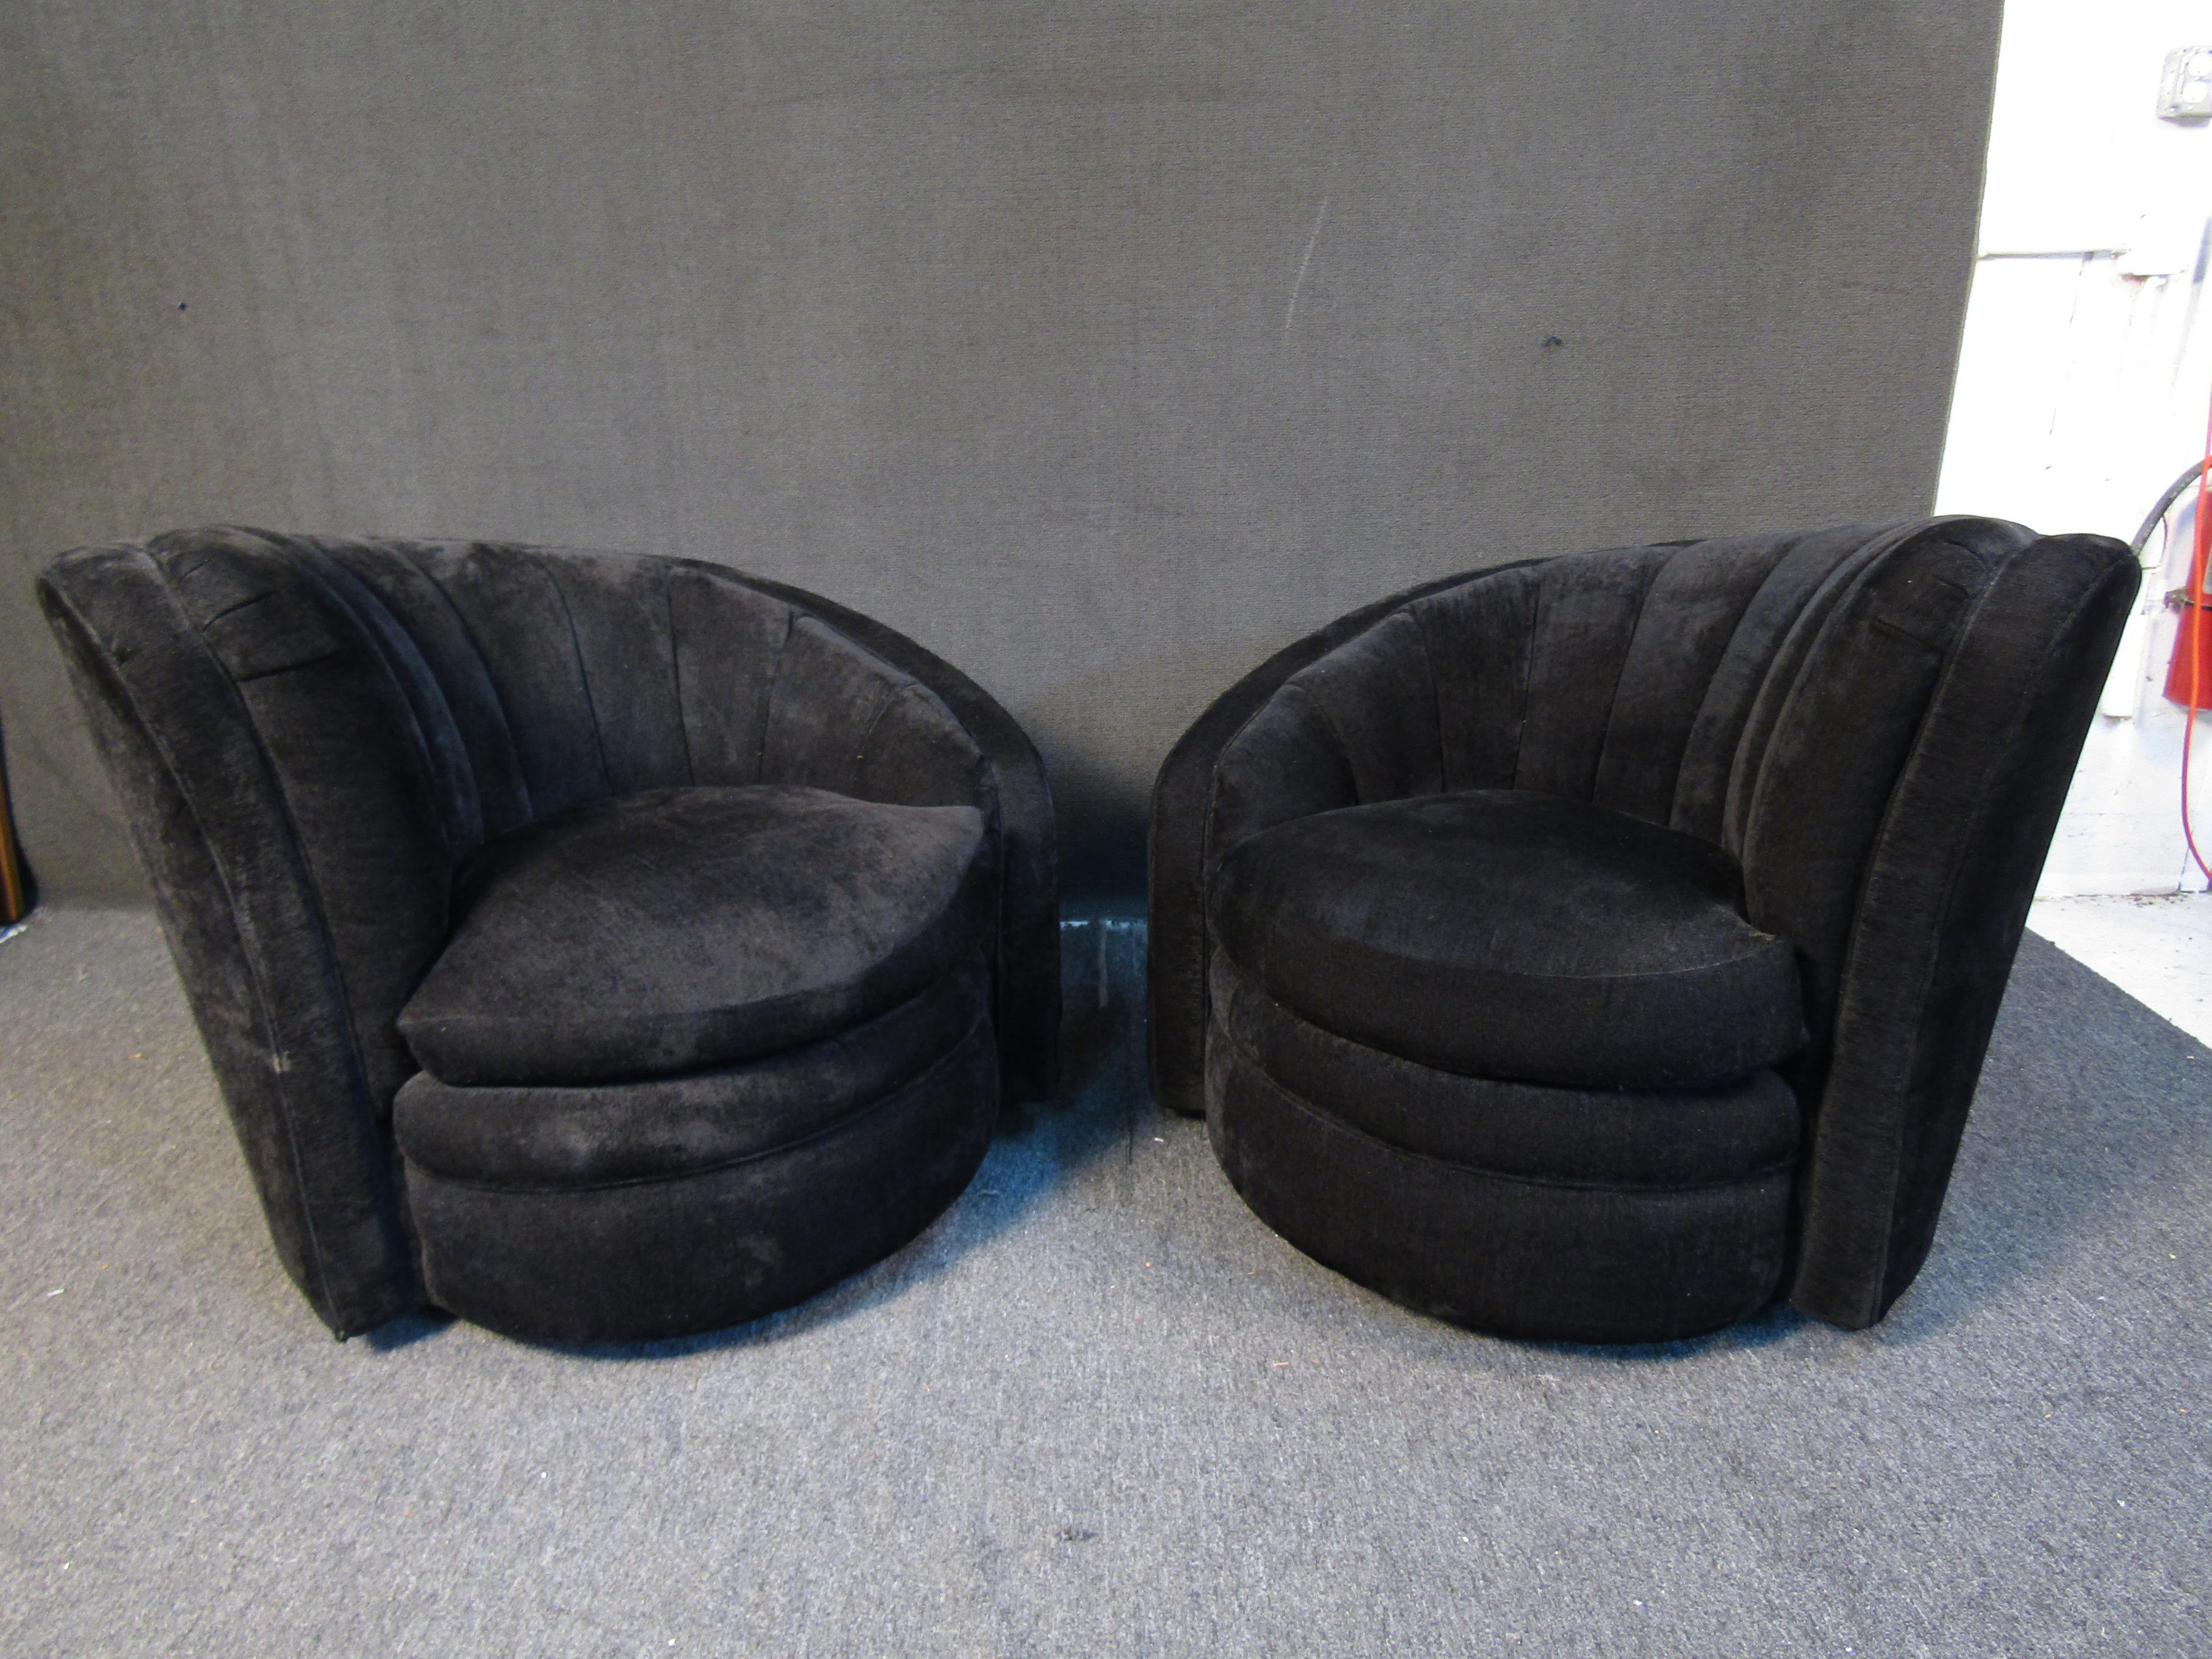 Unique spiral back swiveling lounge chairs featuring dark upholstery and a mid-century modern look. Please confirm item location with seller (NY/NJ).